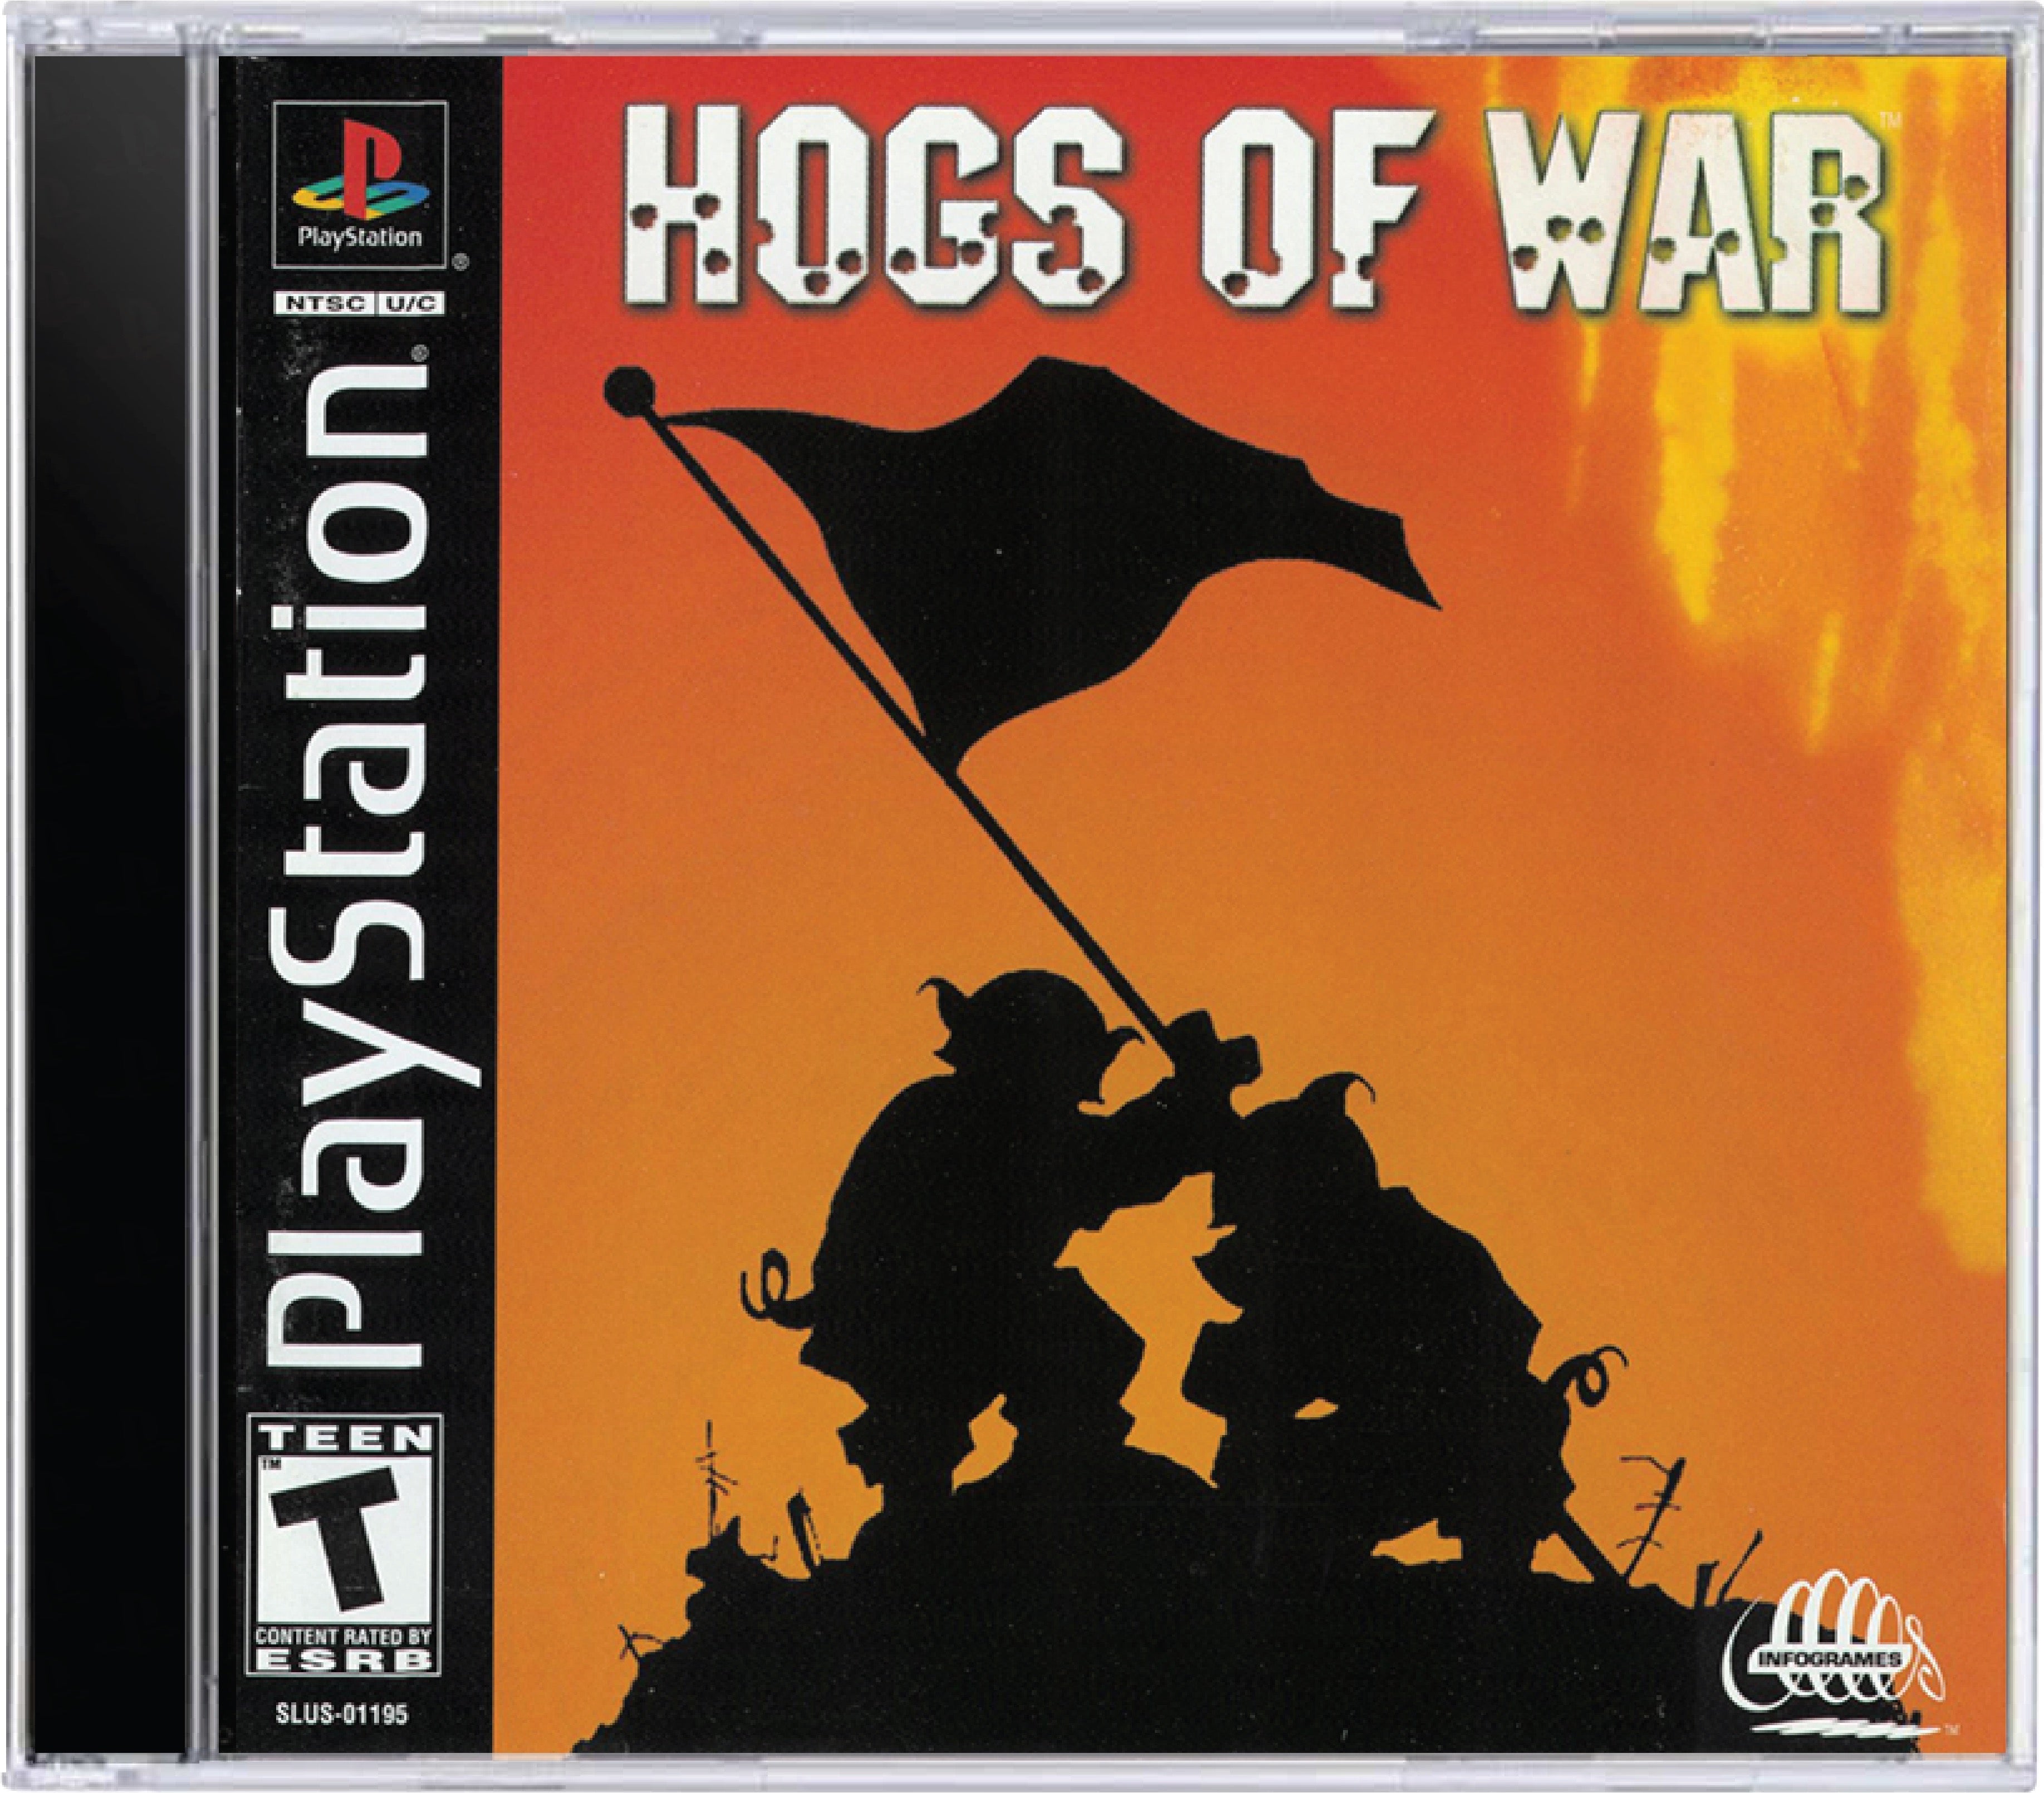 Hogs of War Cover Art and Product Photo